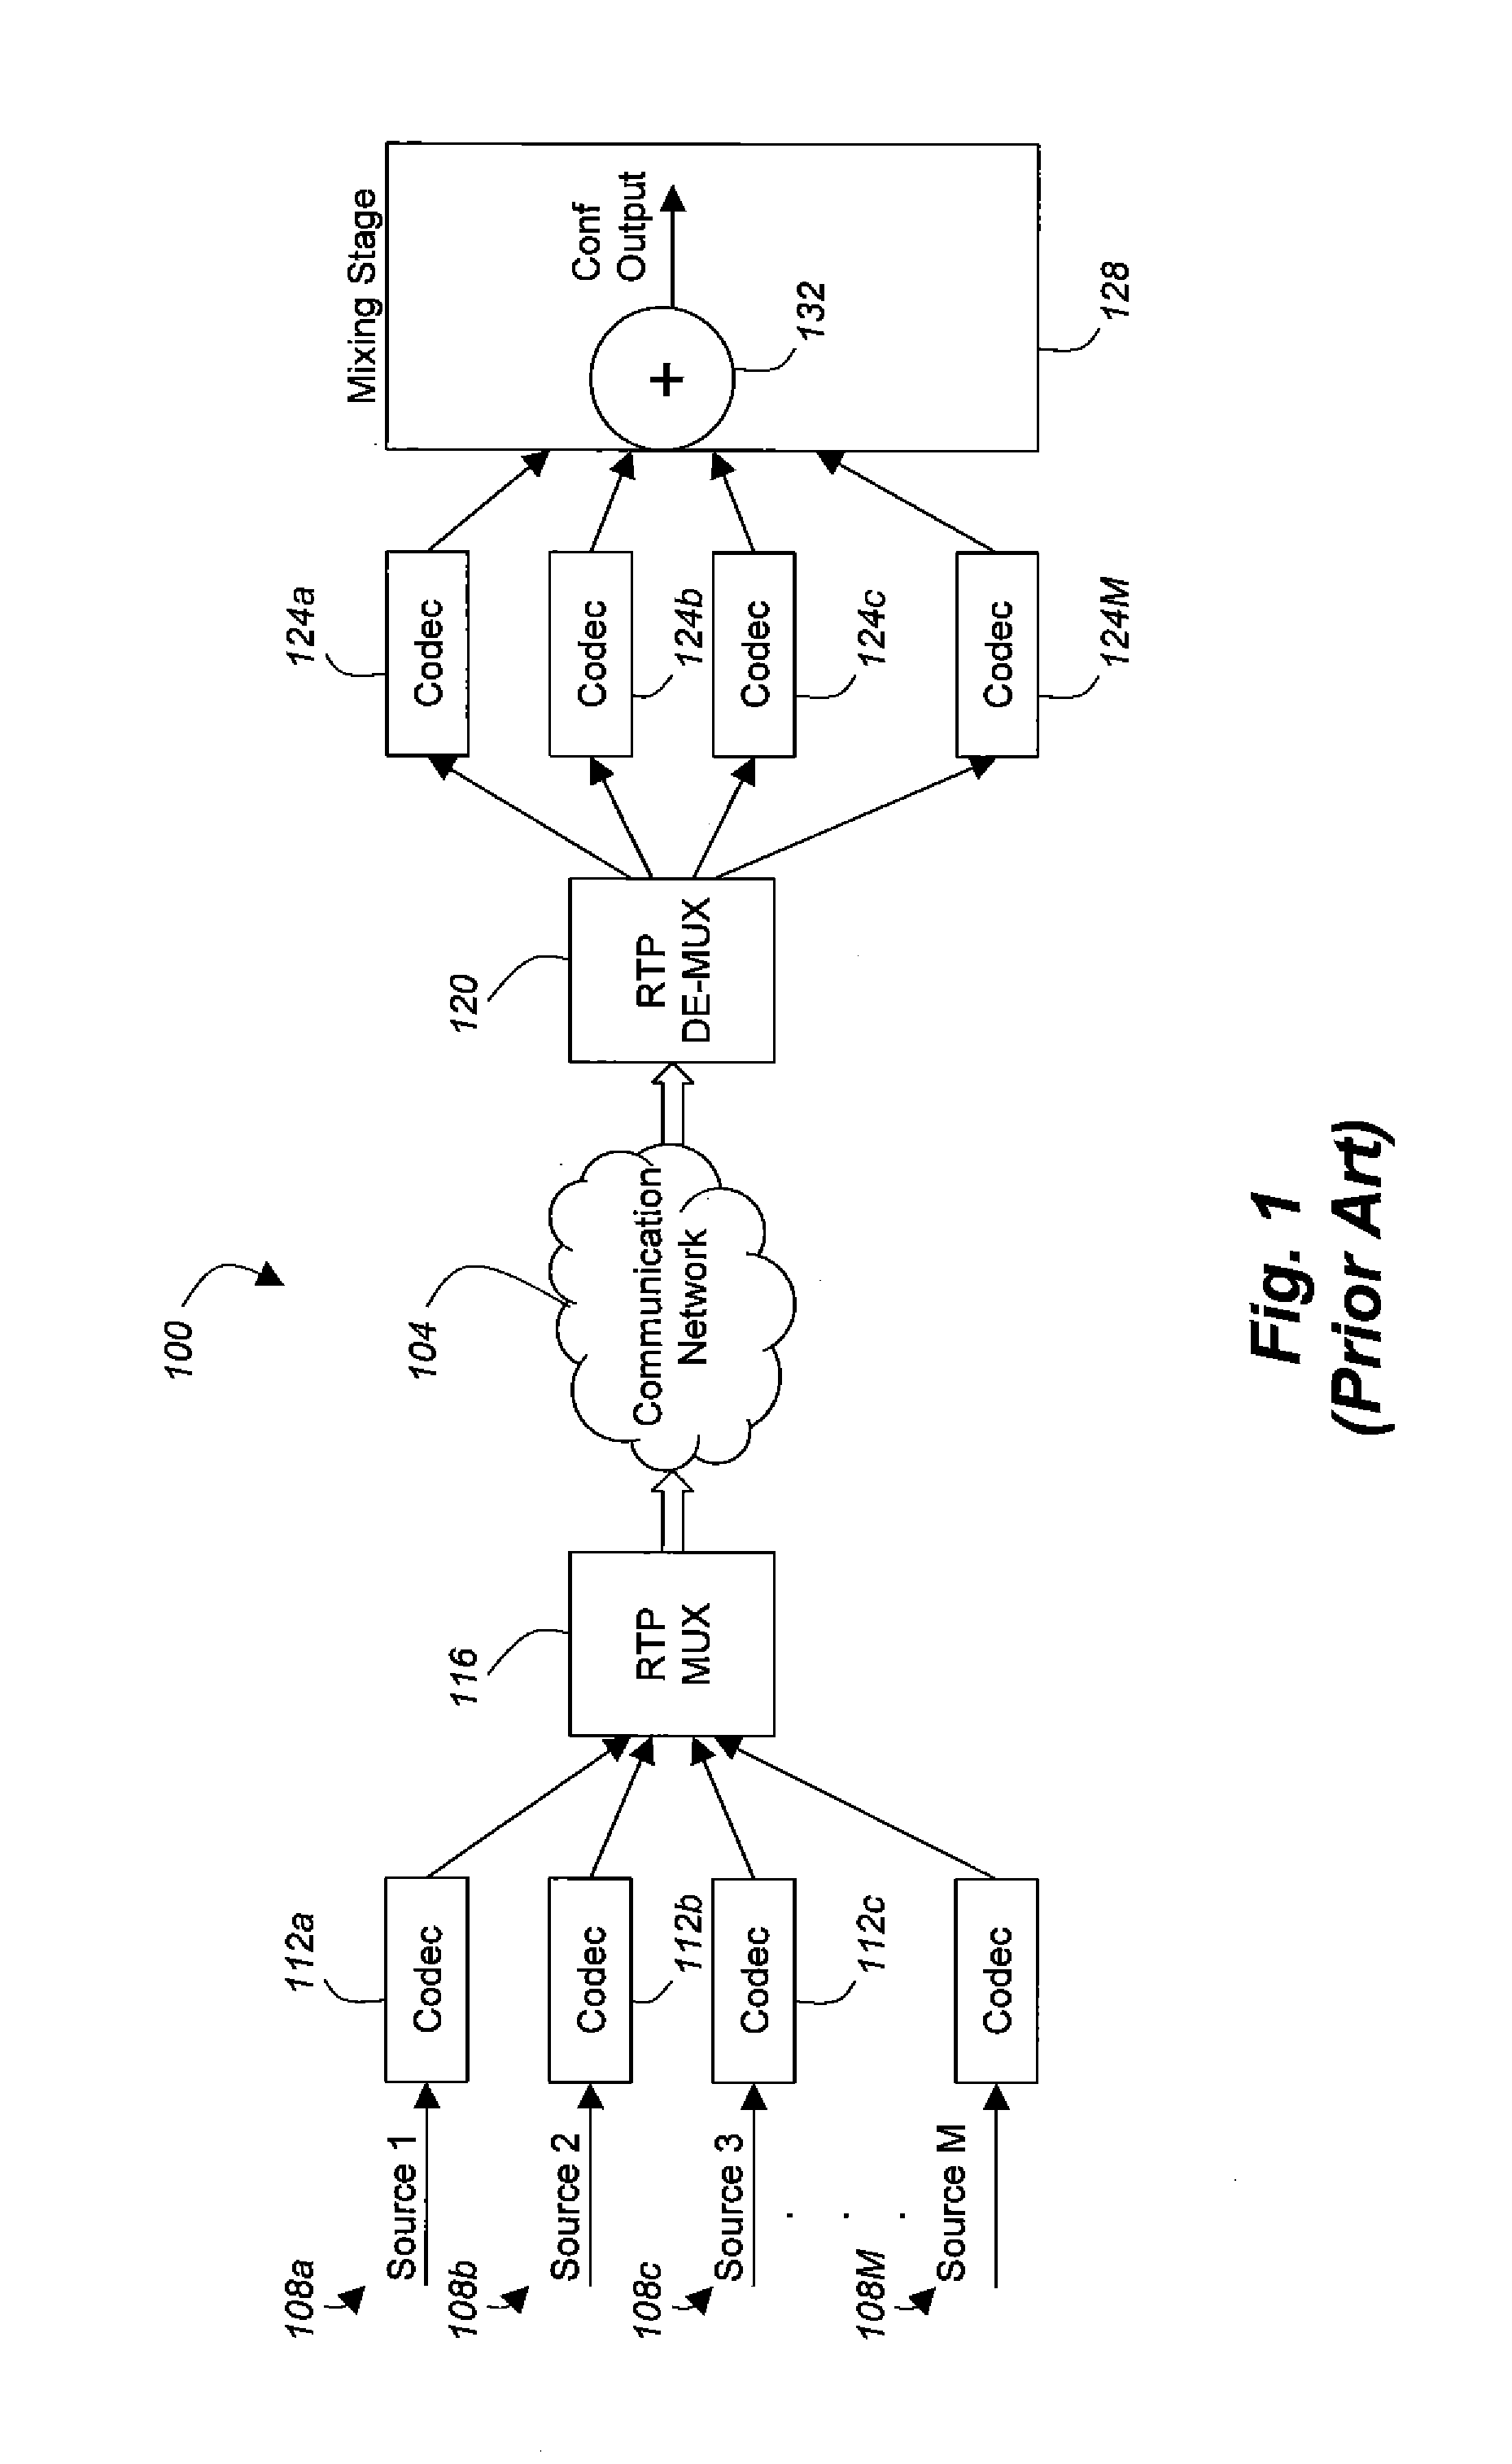 Multiplexing VOIP streams for conferencing and selective playback of audio streams